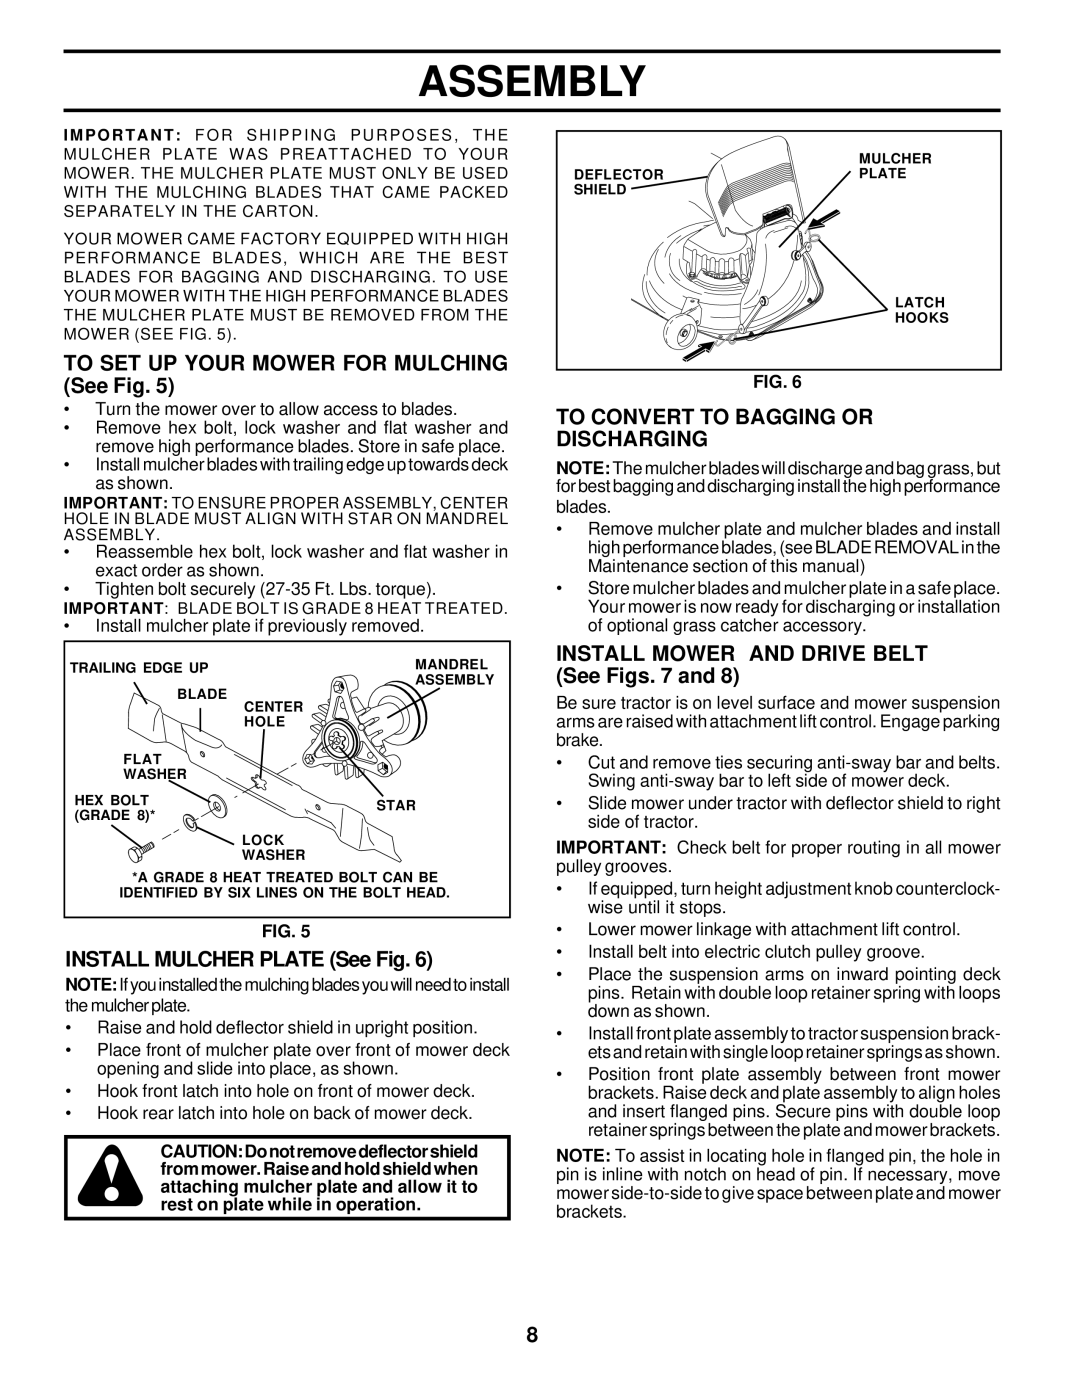 Poulan 178500 owner manual To SET UP Your Mower for Mulching See Fig, Install Mulcher Plate See Fig 